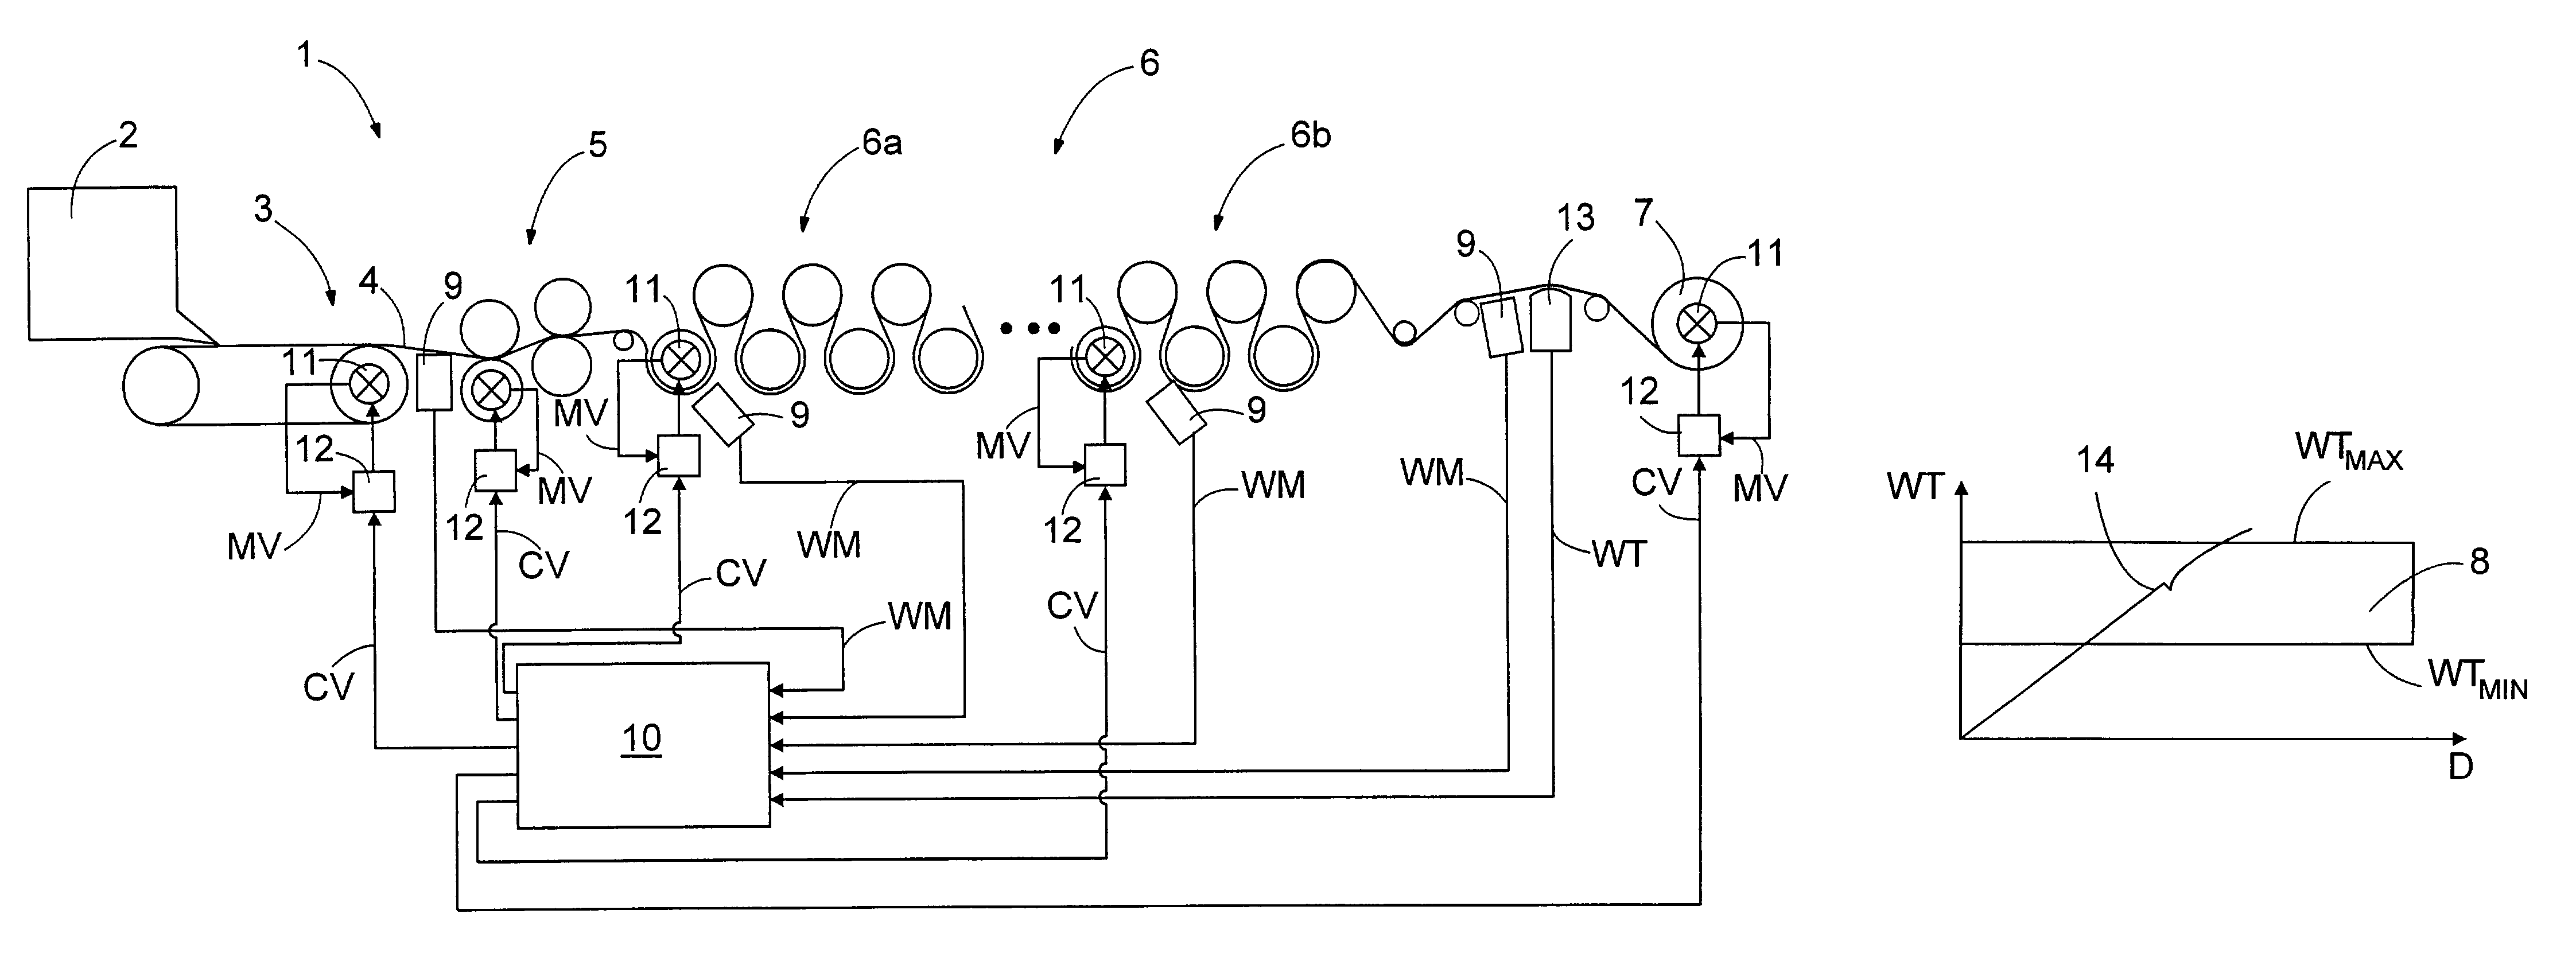 Method and equipment in connection with a paper machine or a paper web finishing apparatus